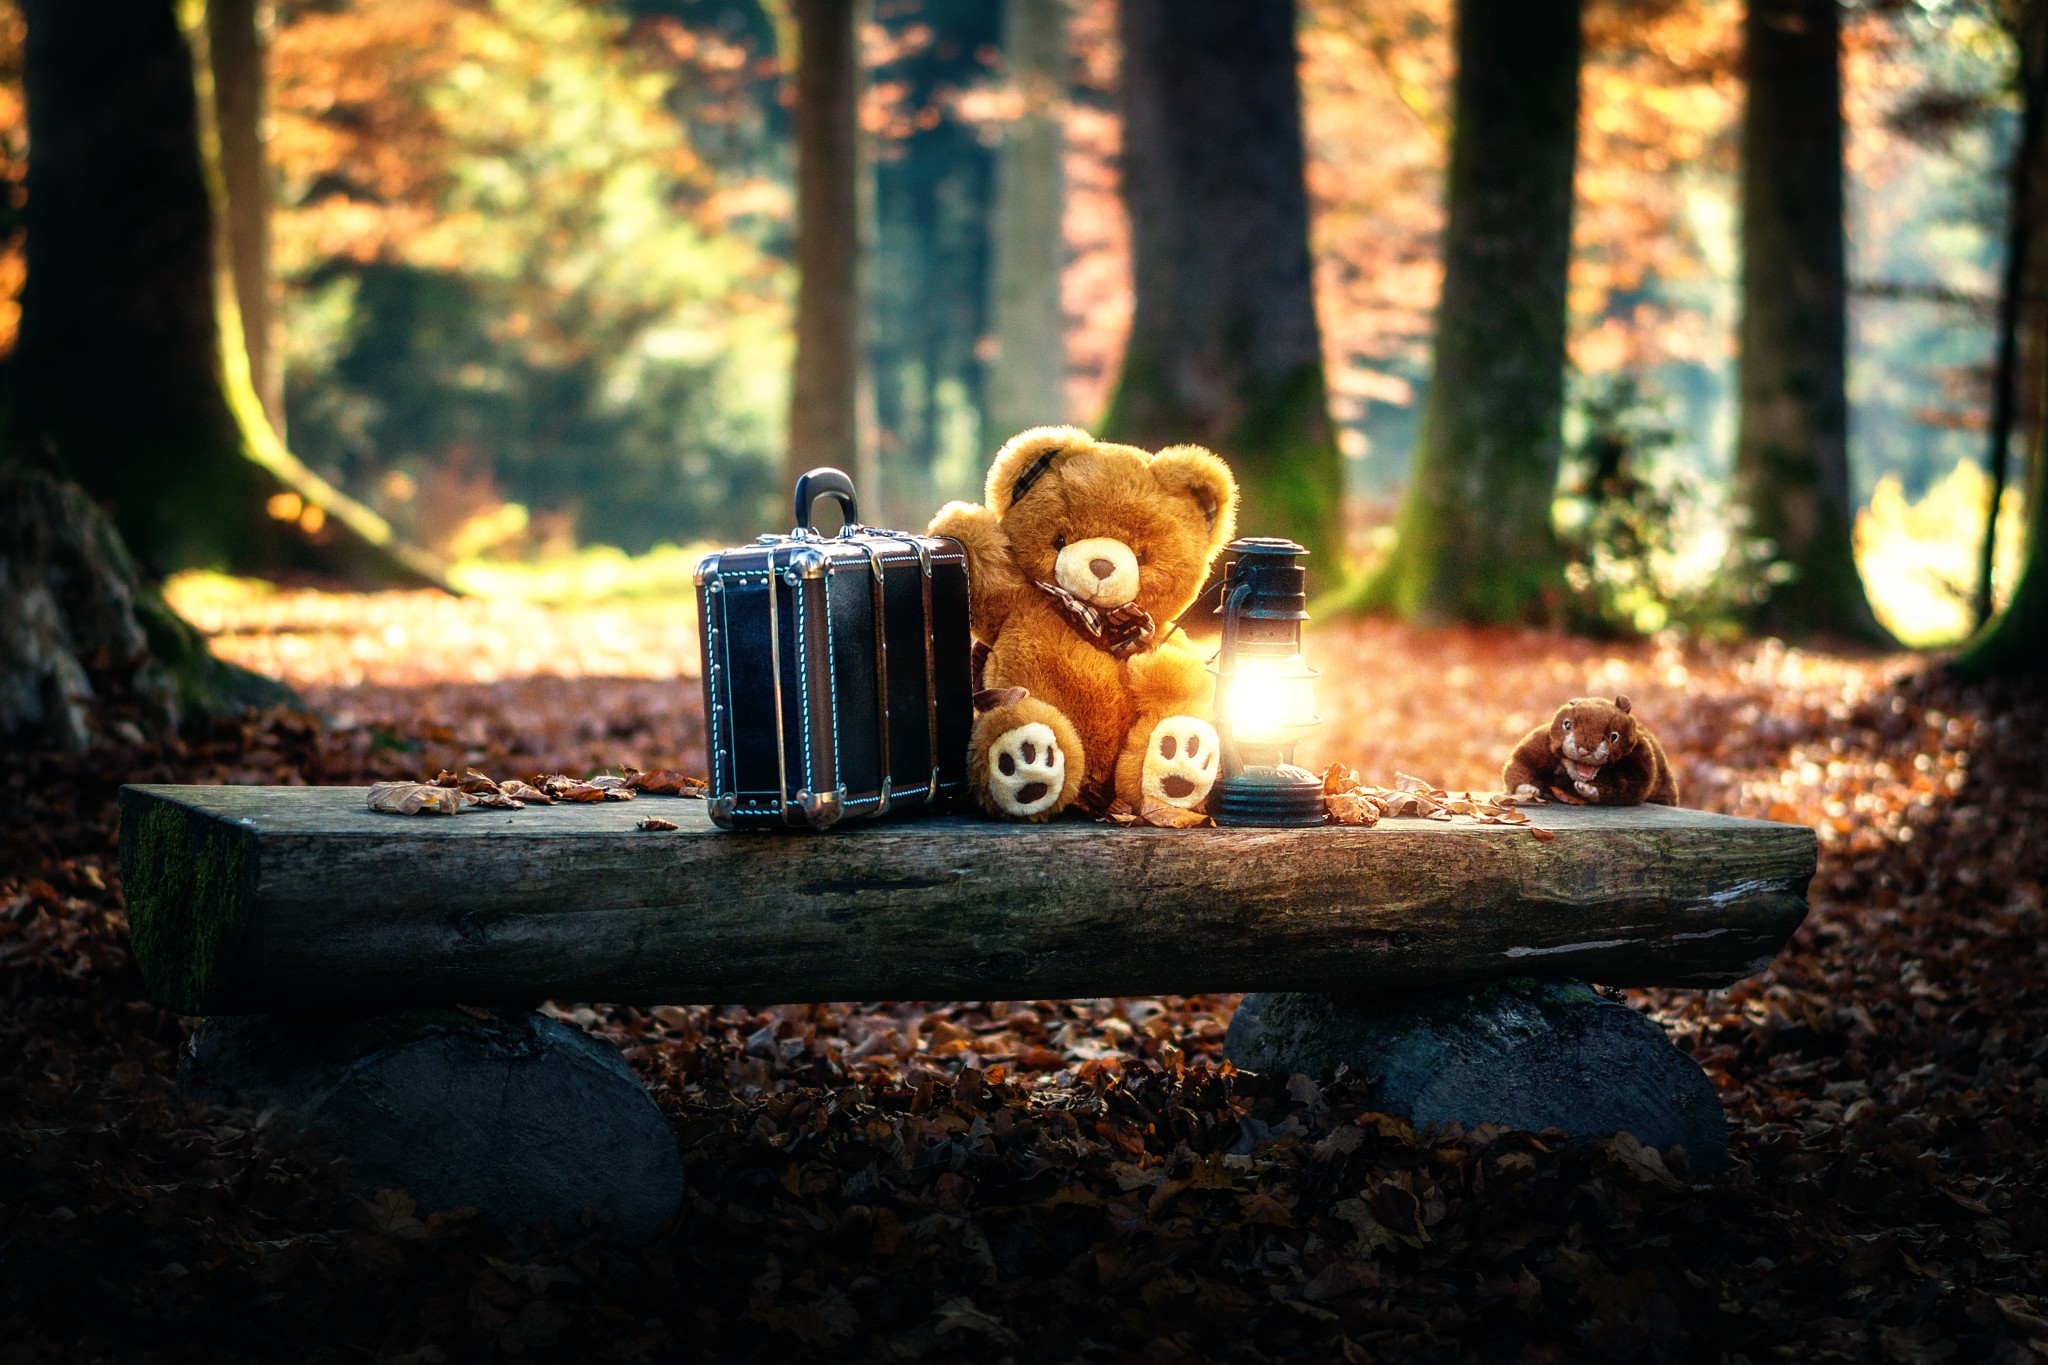 General 2048x1365 teddy bears toys trees suitcase fall lantern bench log fallen leaves forest squirrel nature plush toy outdoors sitting